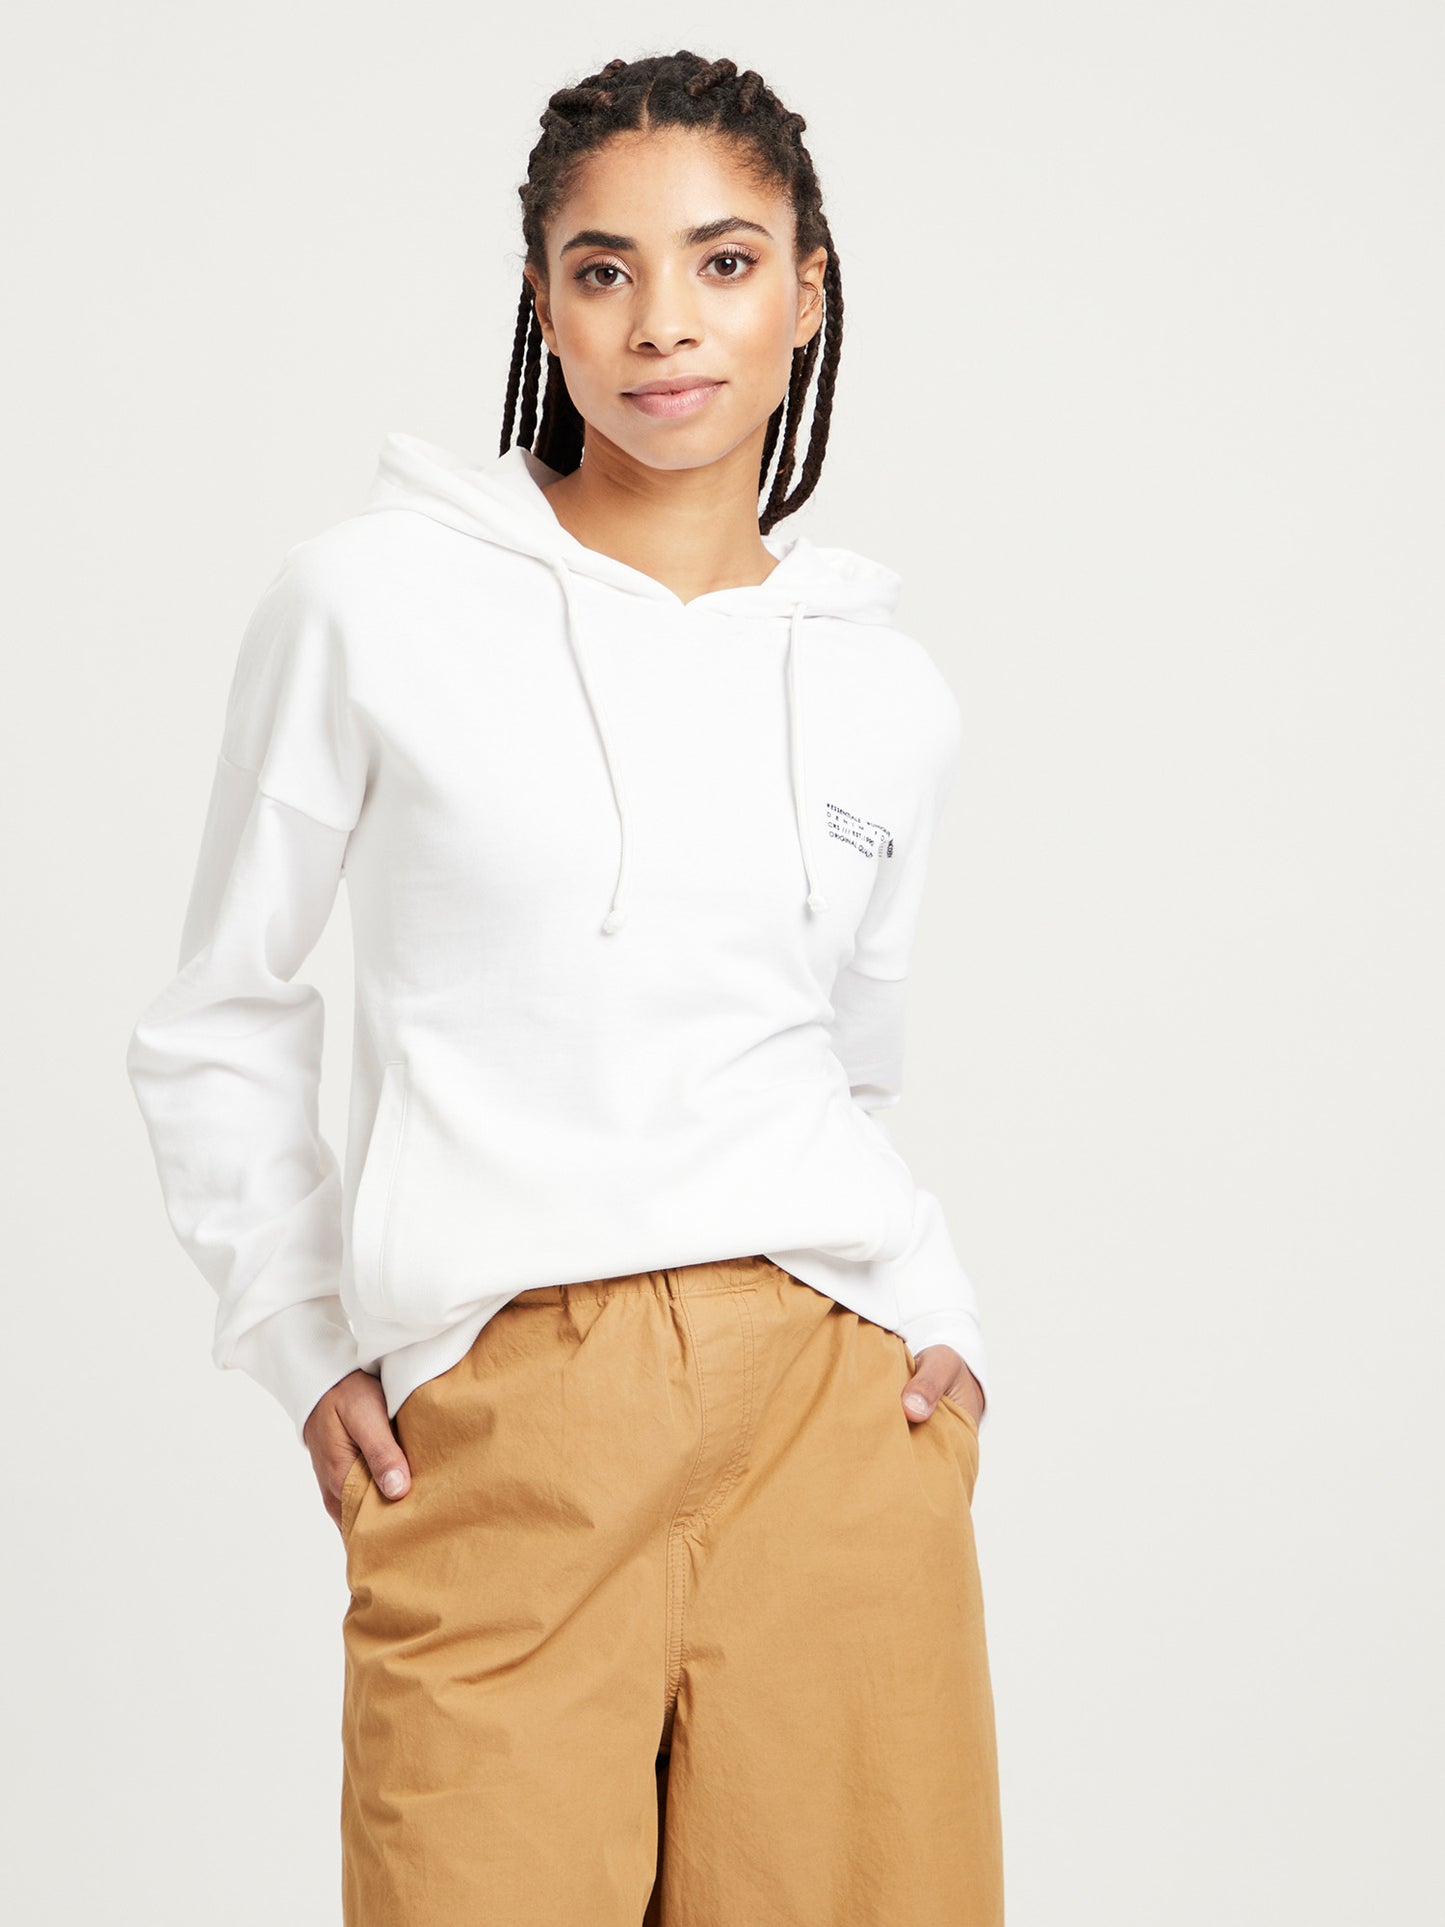 Women's regular hoodie with two pockets, white.